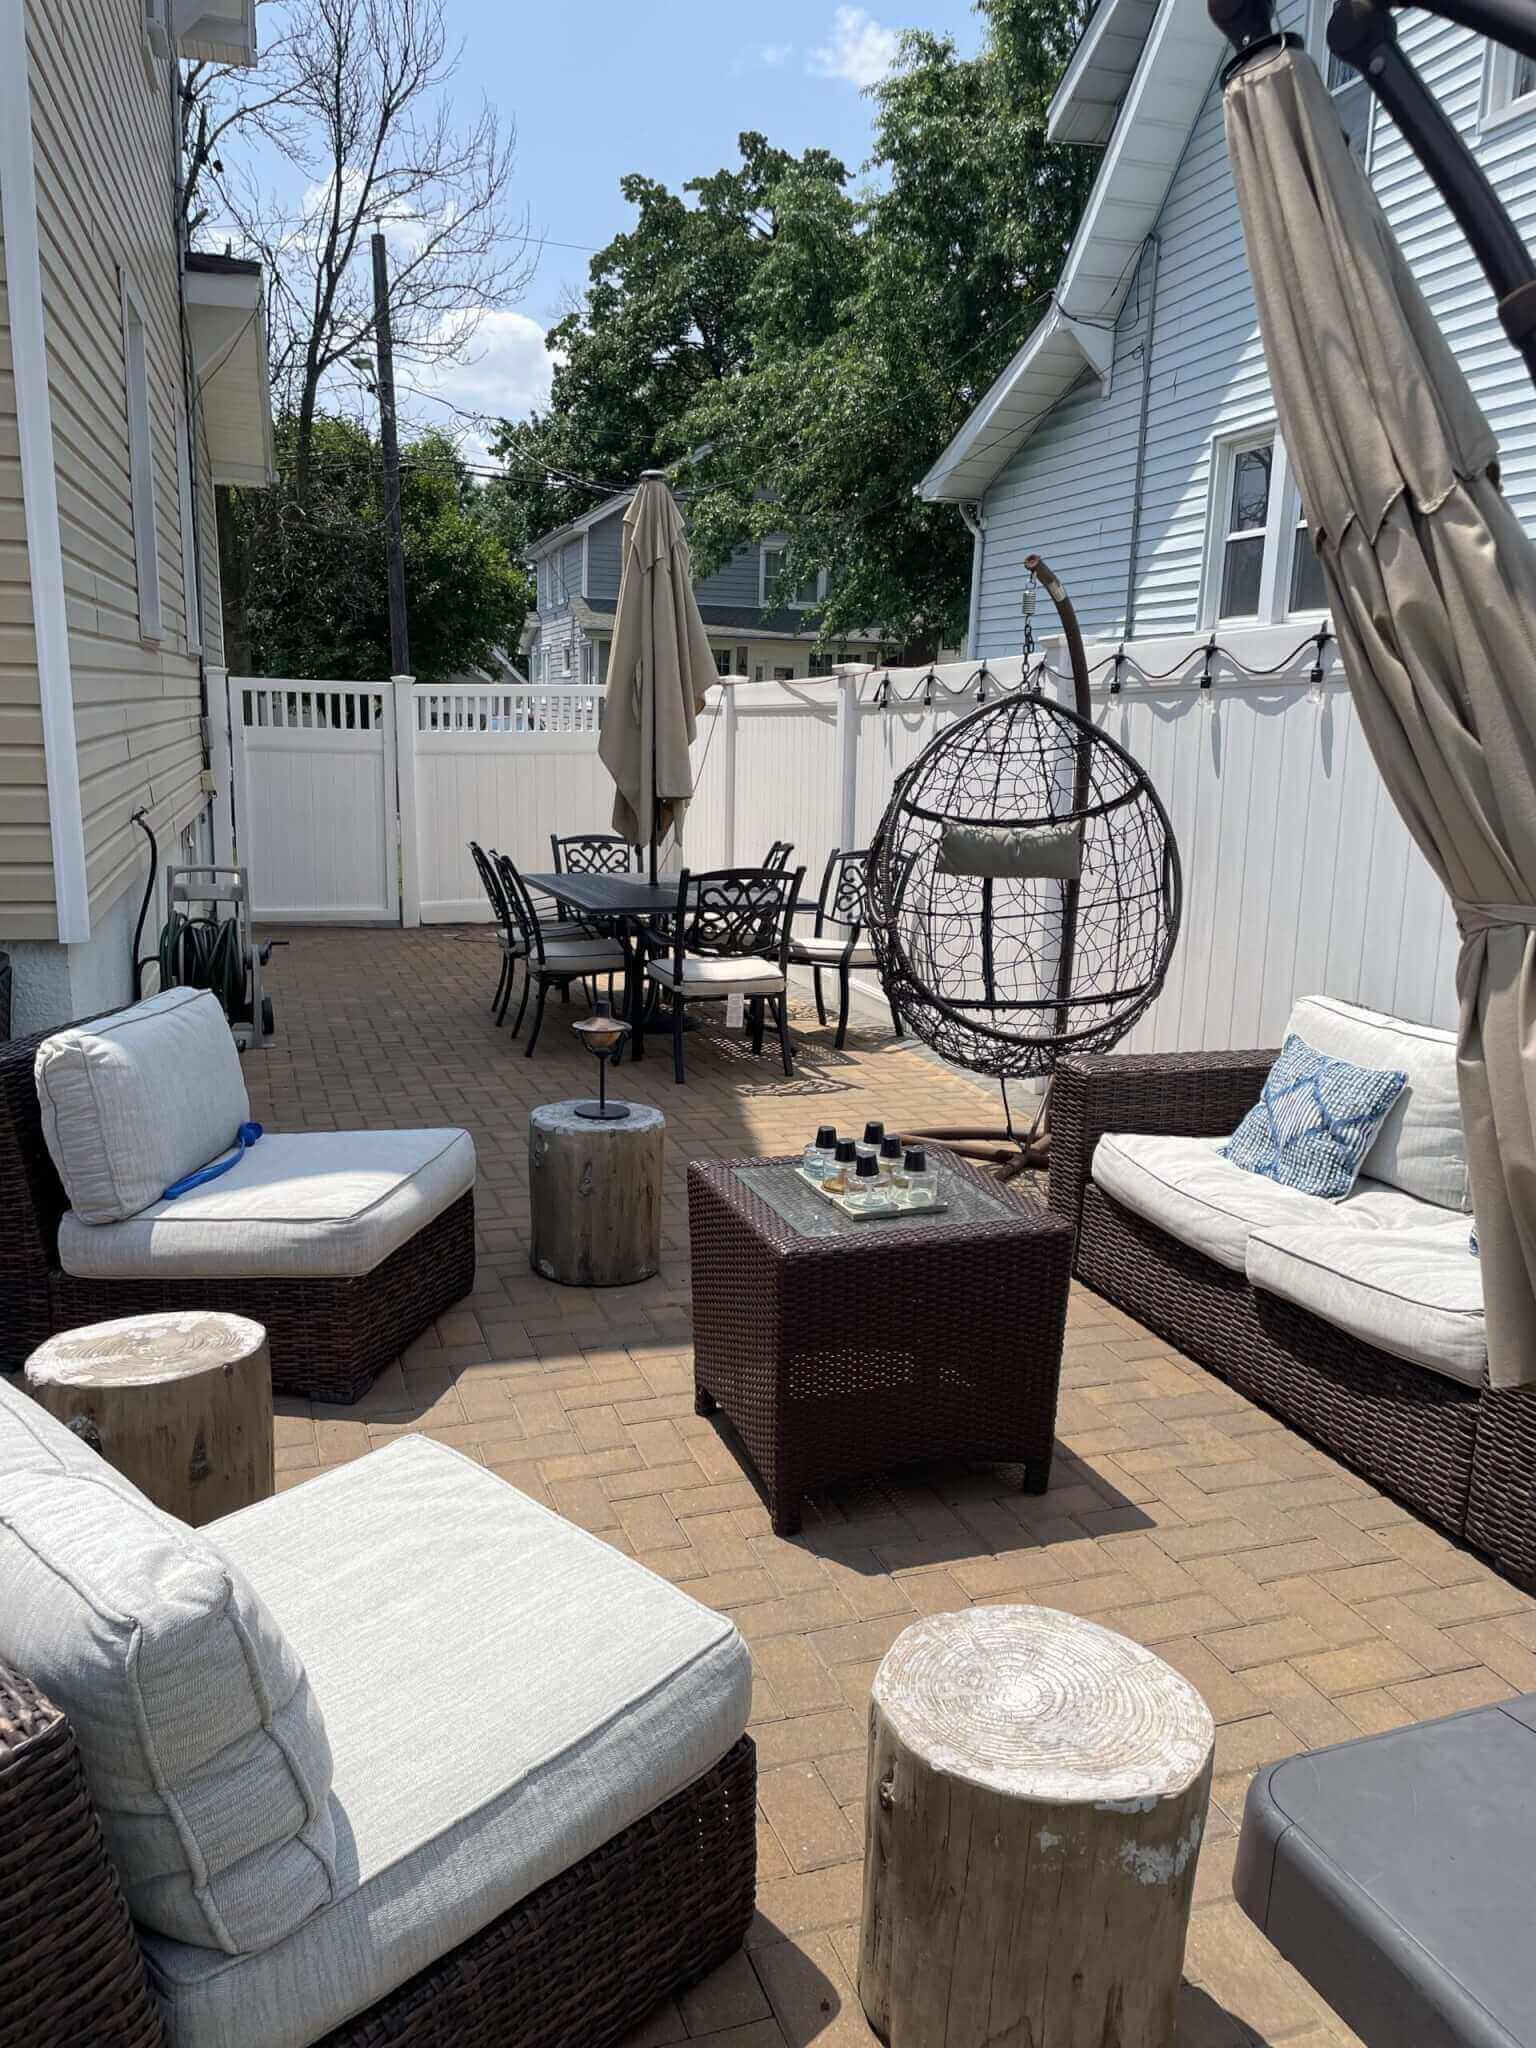 A backyard oasis featuring wicker furniture and an umbrella, beautifully landscaped by experienced professionals in Bergen County, NJ.